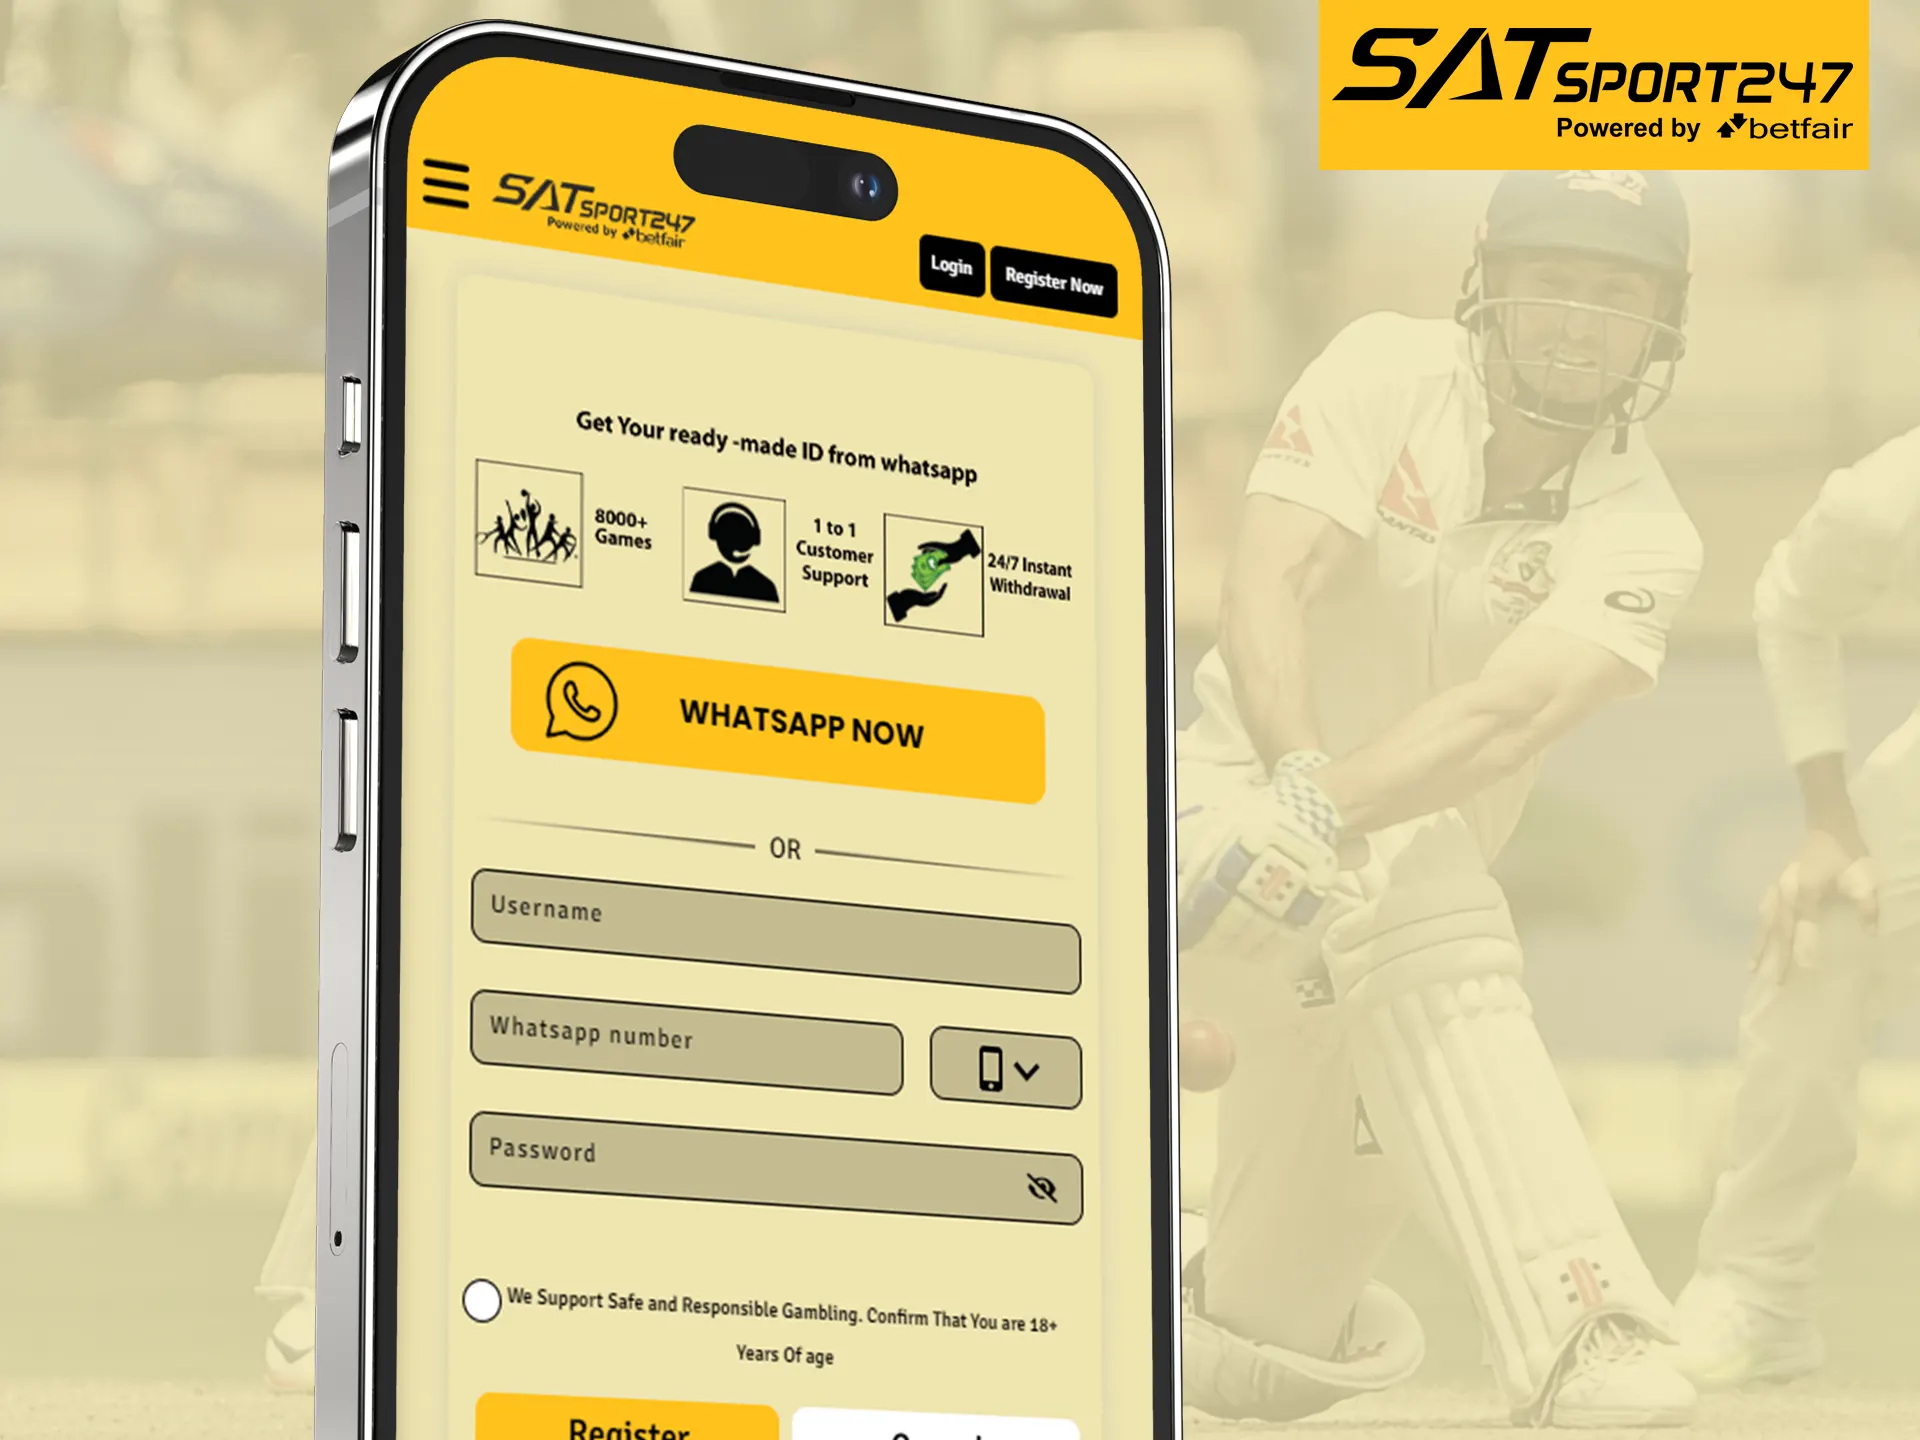 Complete a simple registration in the Satsport247 app.